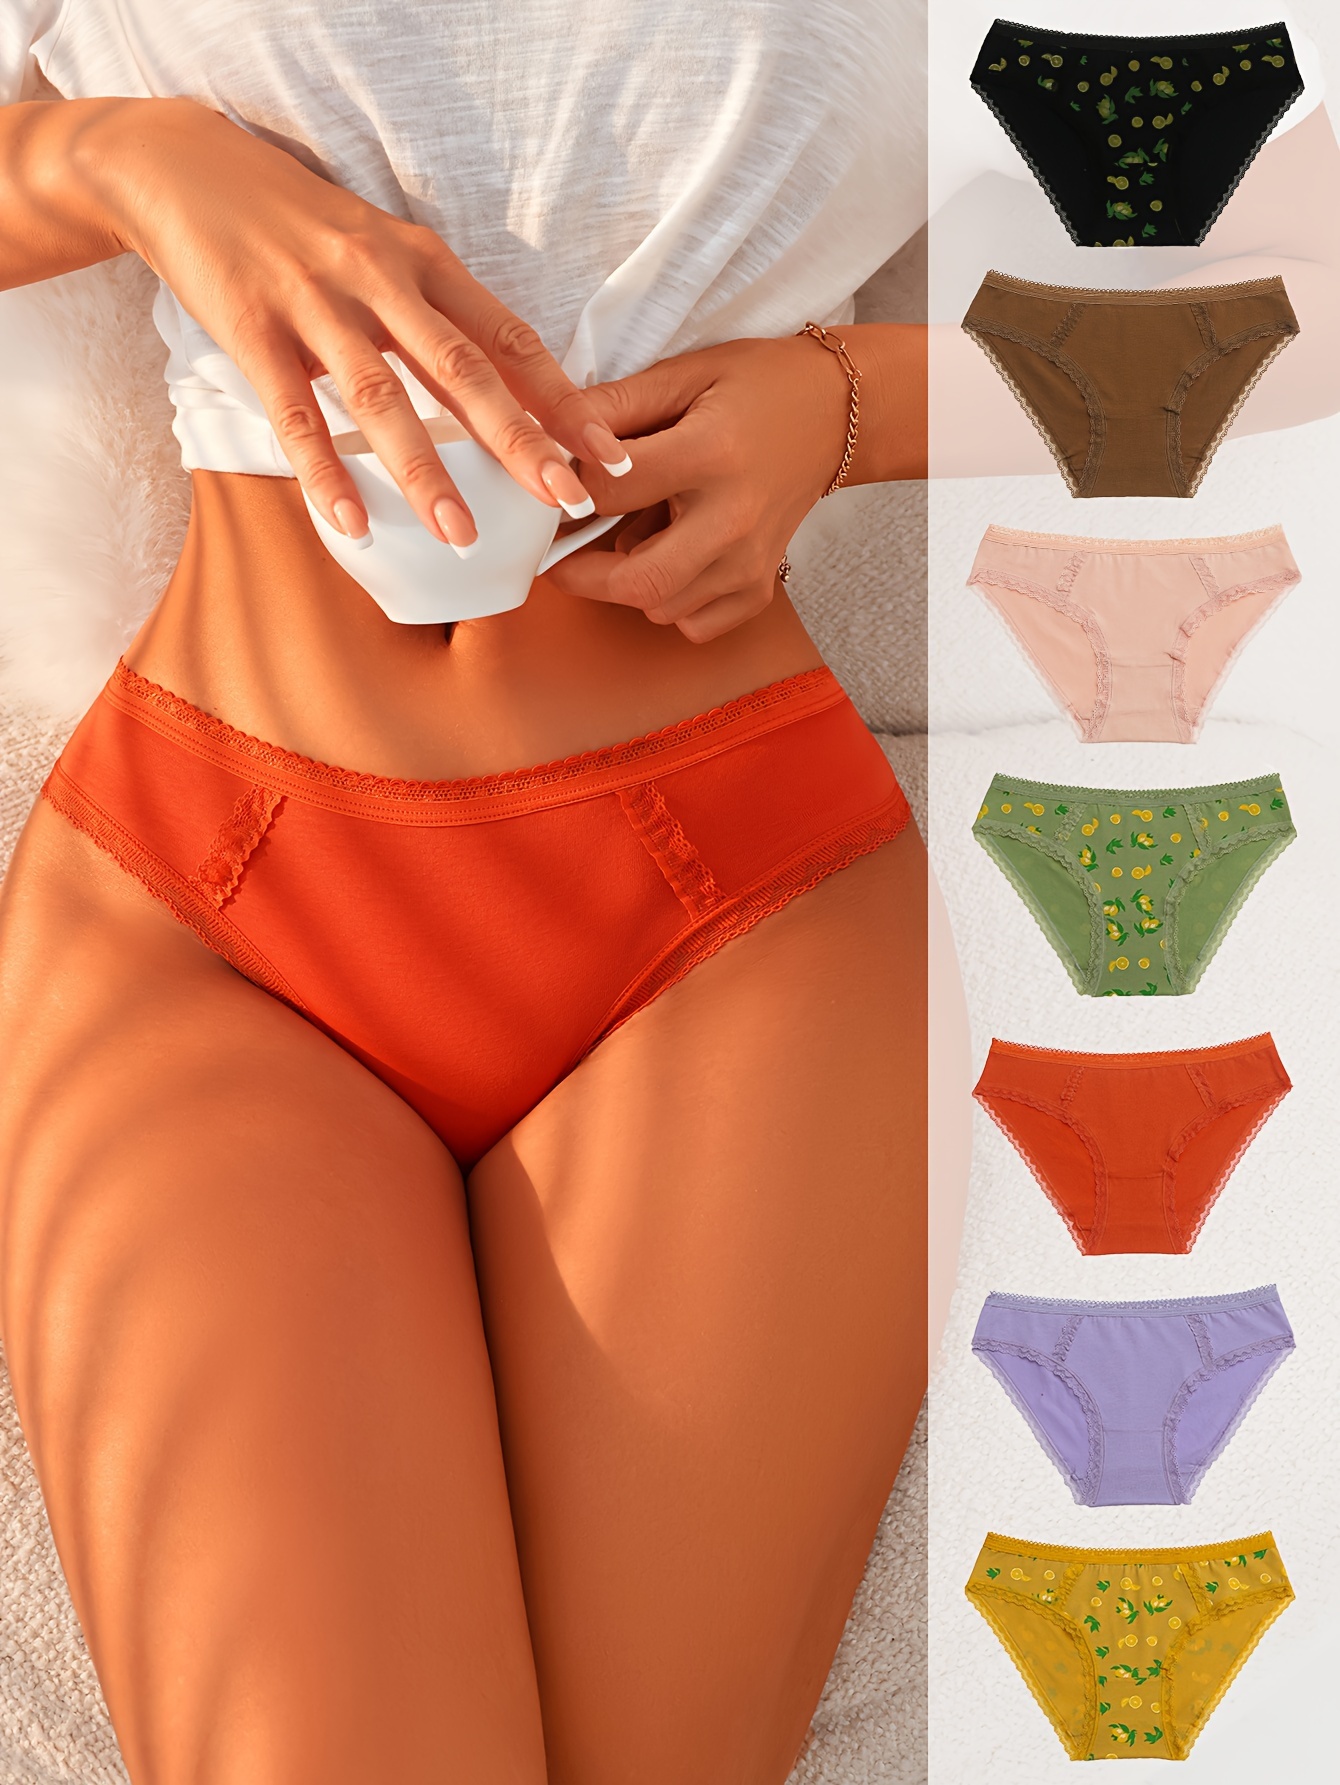 Women's Fruit of the Loom® 12-pack Cotton Low-Rise Hipster Panty